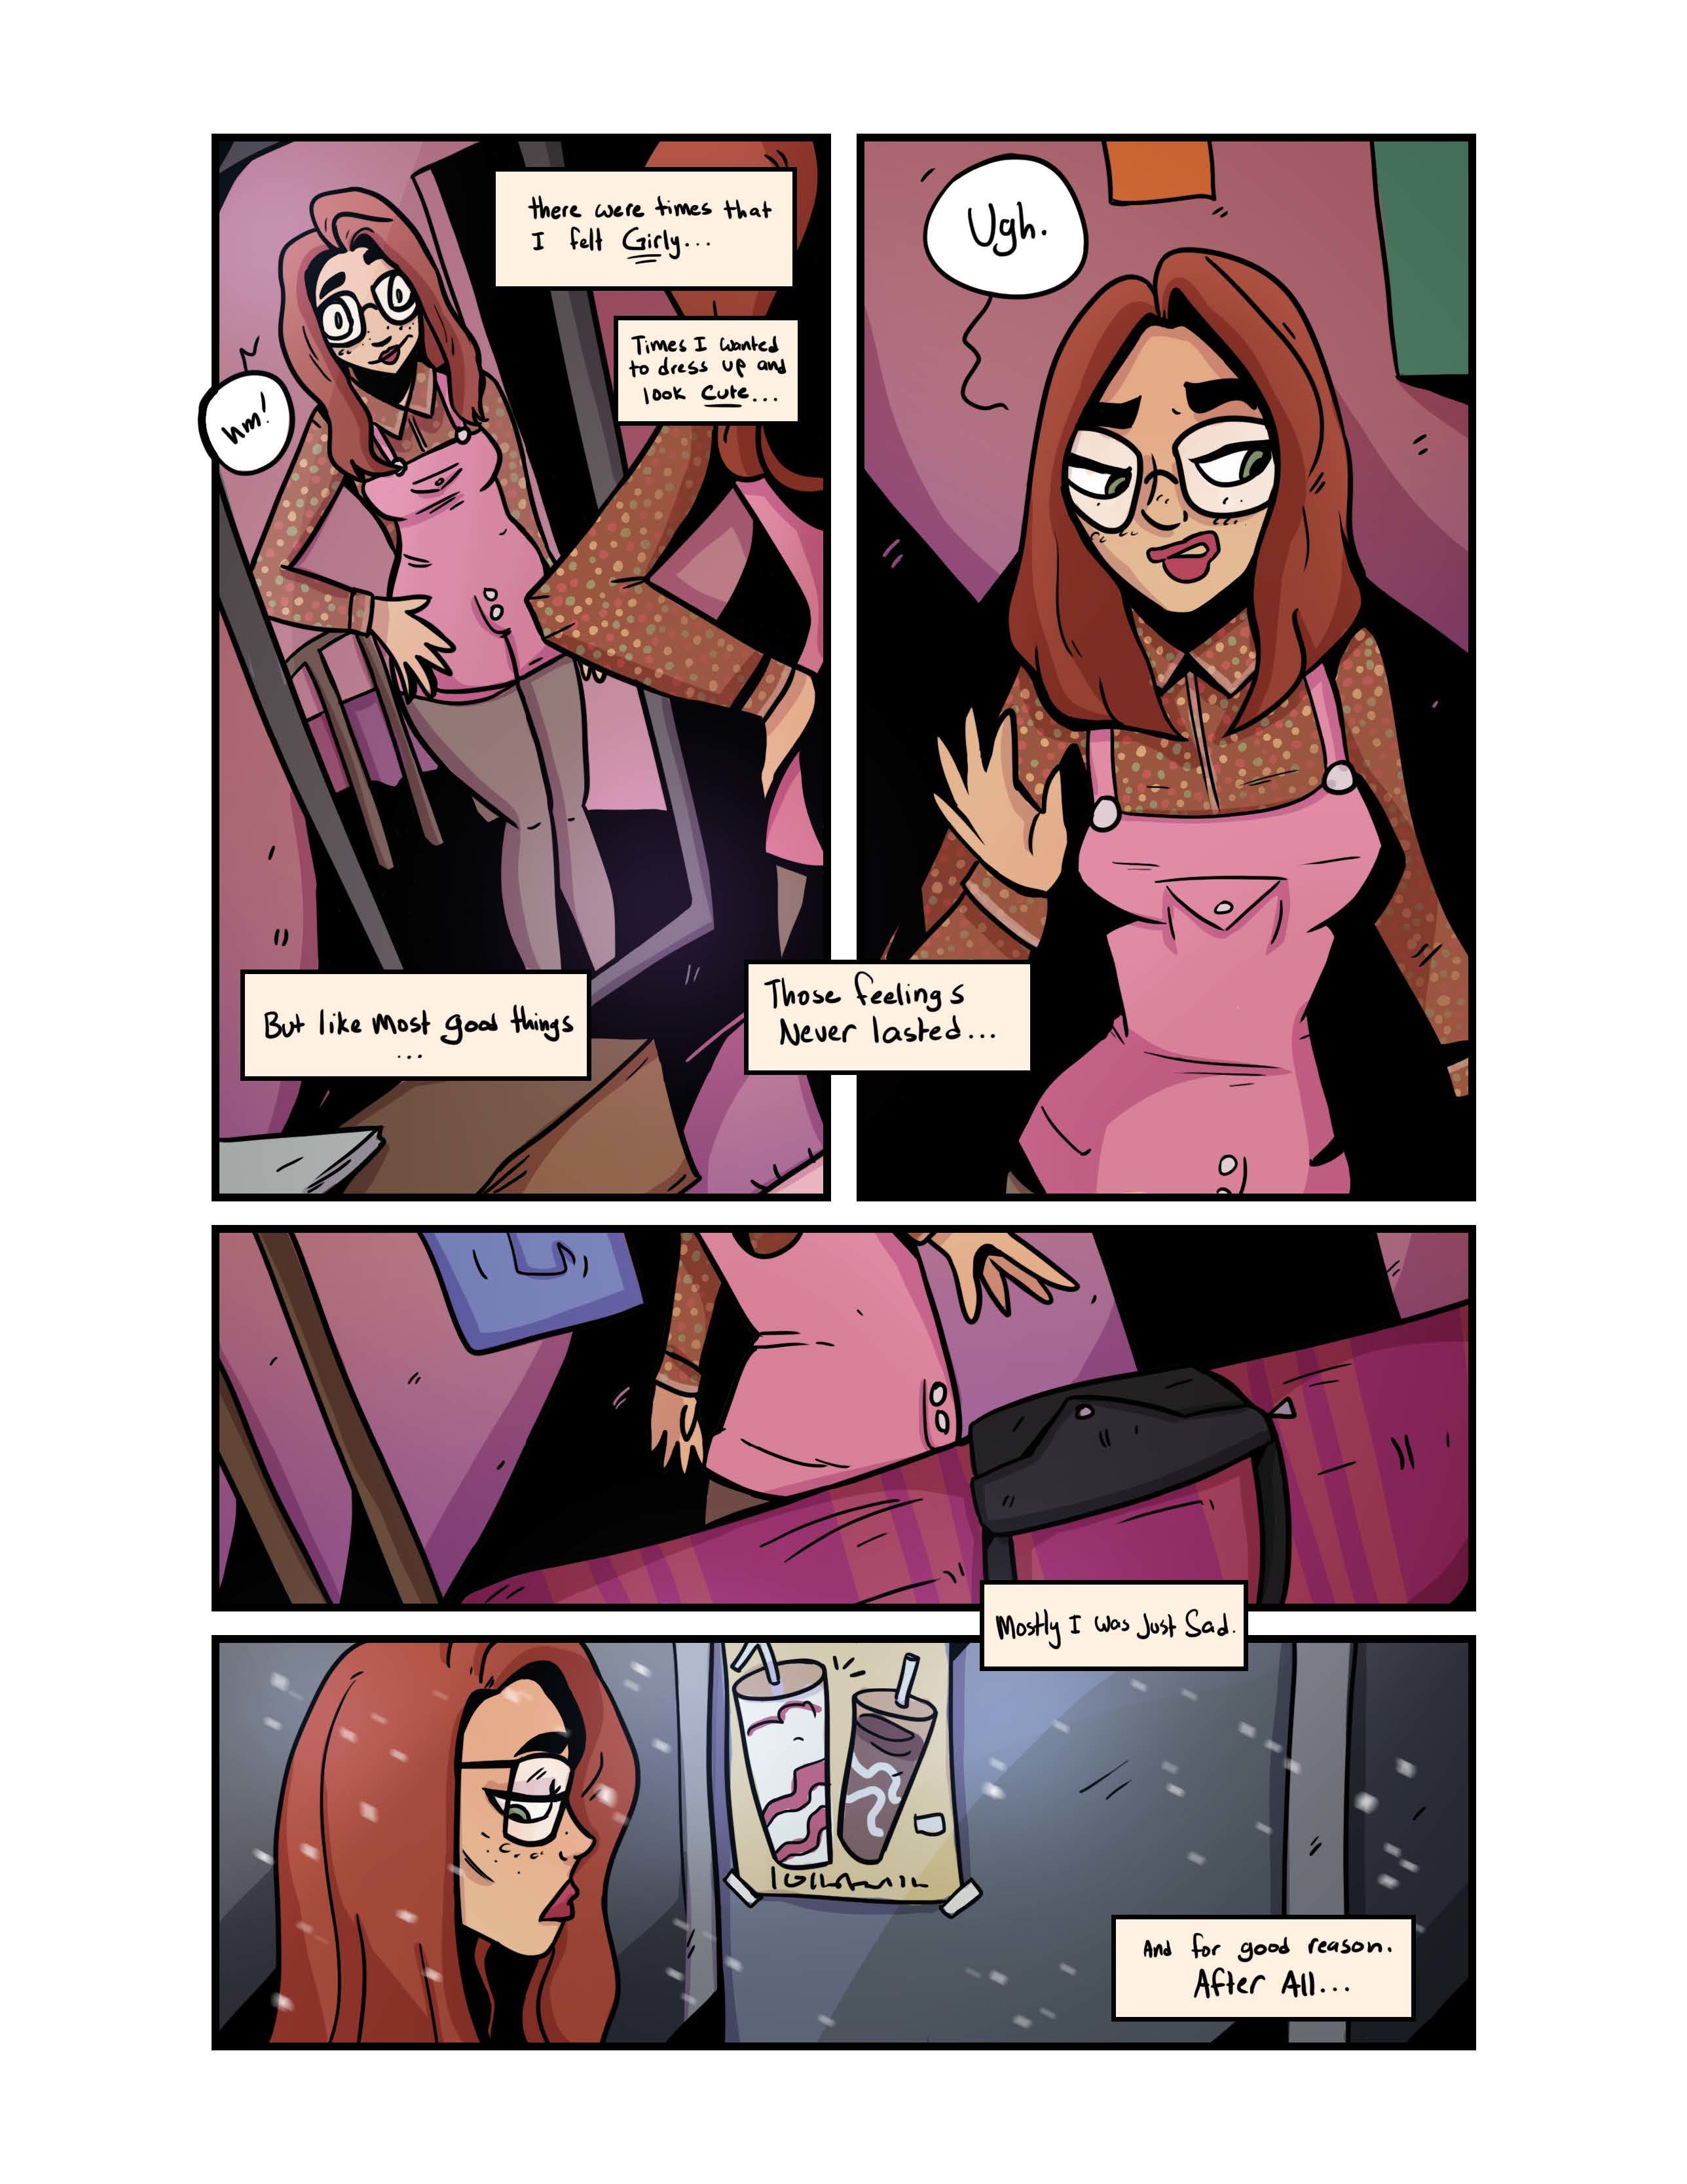 The New Girl Issue 1-5 by Grumpy TG page 23